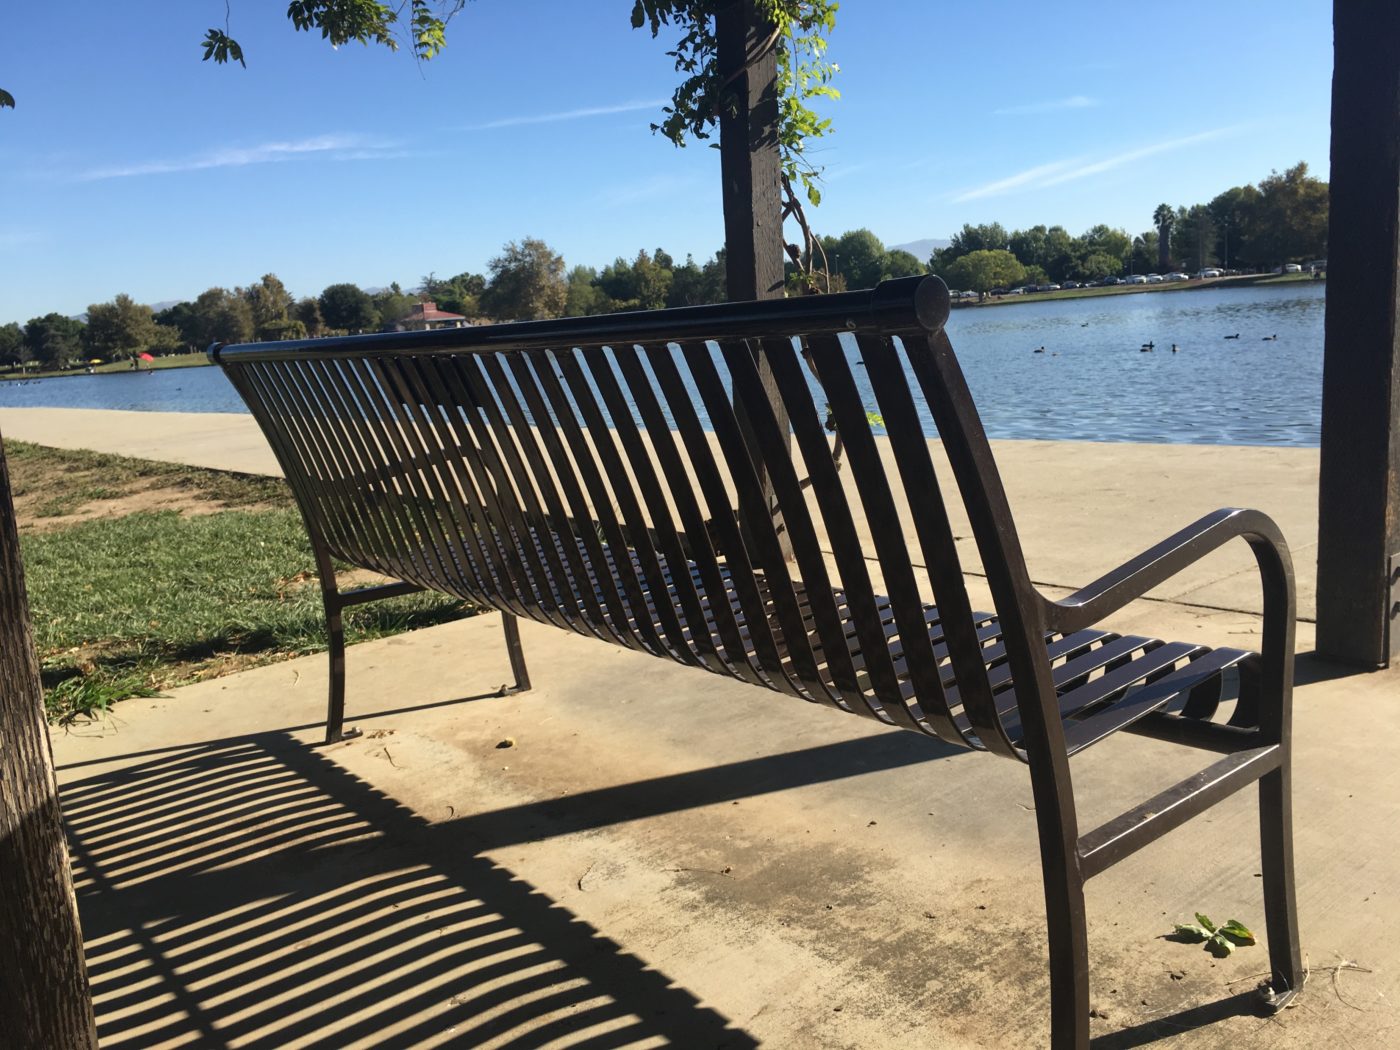 Find all of the fun things to do at Lake Balboa/ANTHONY C. BEILENSON PARK